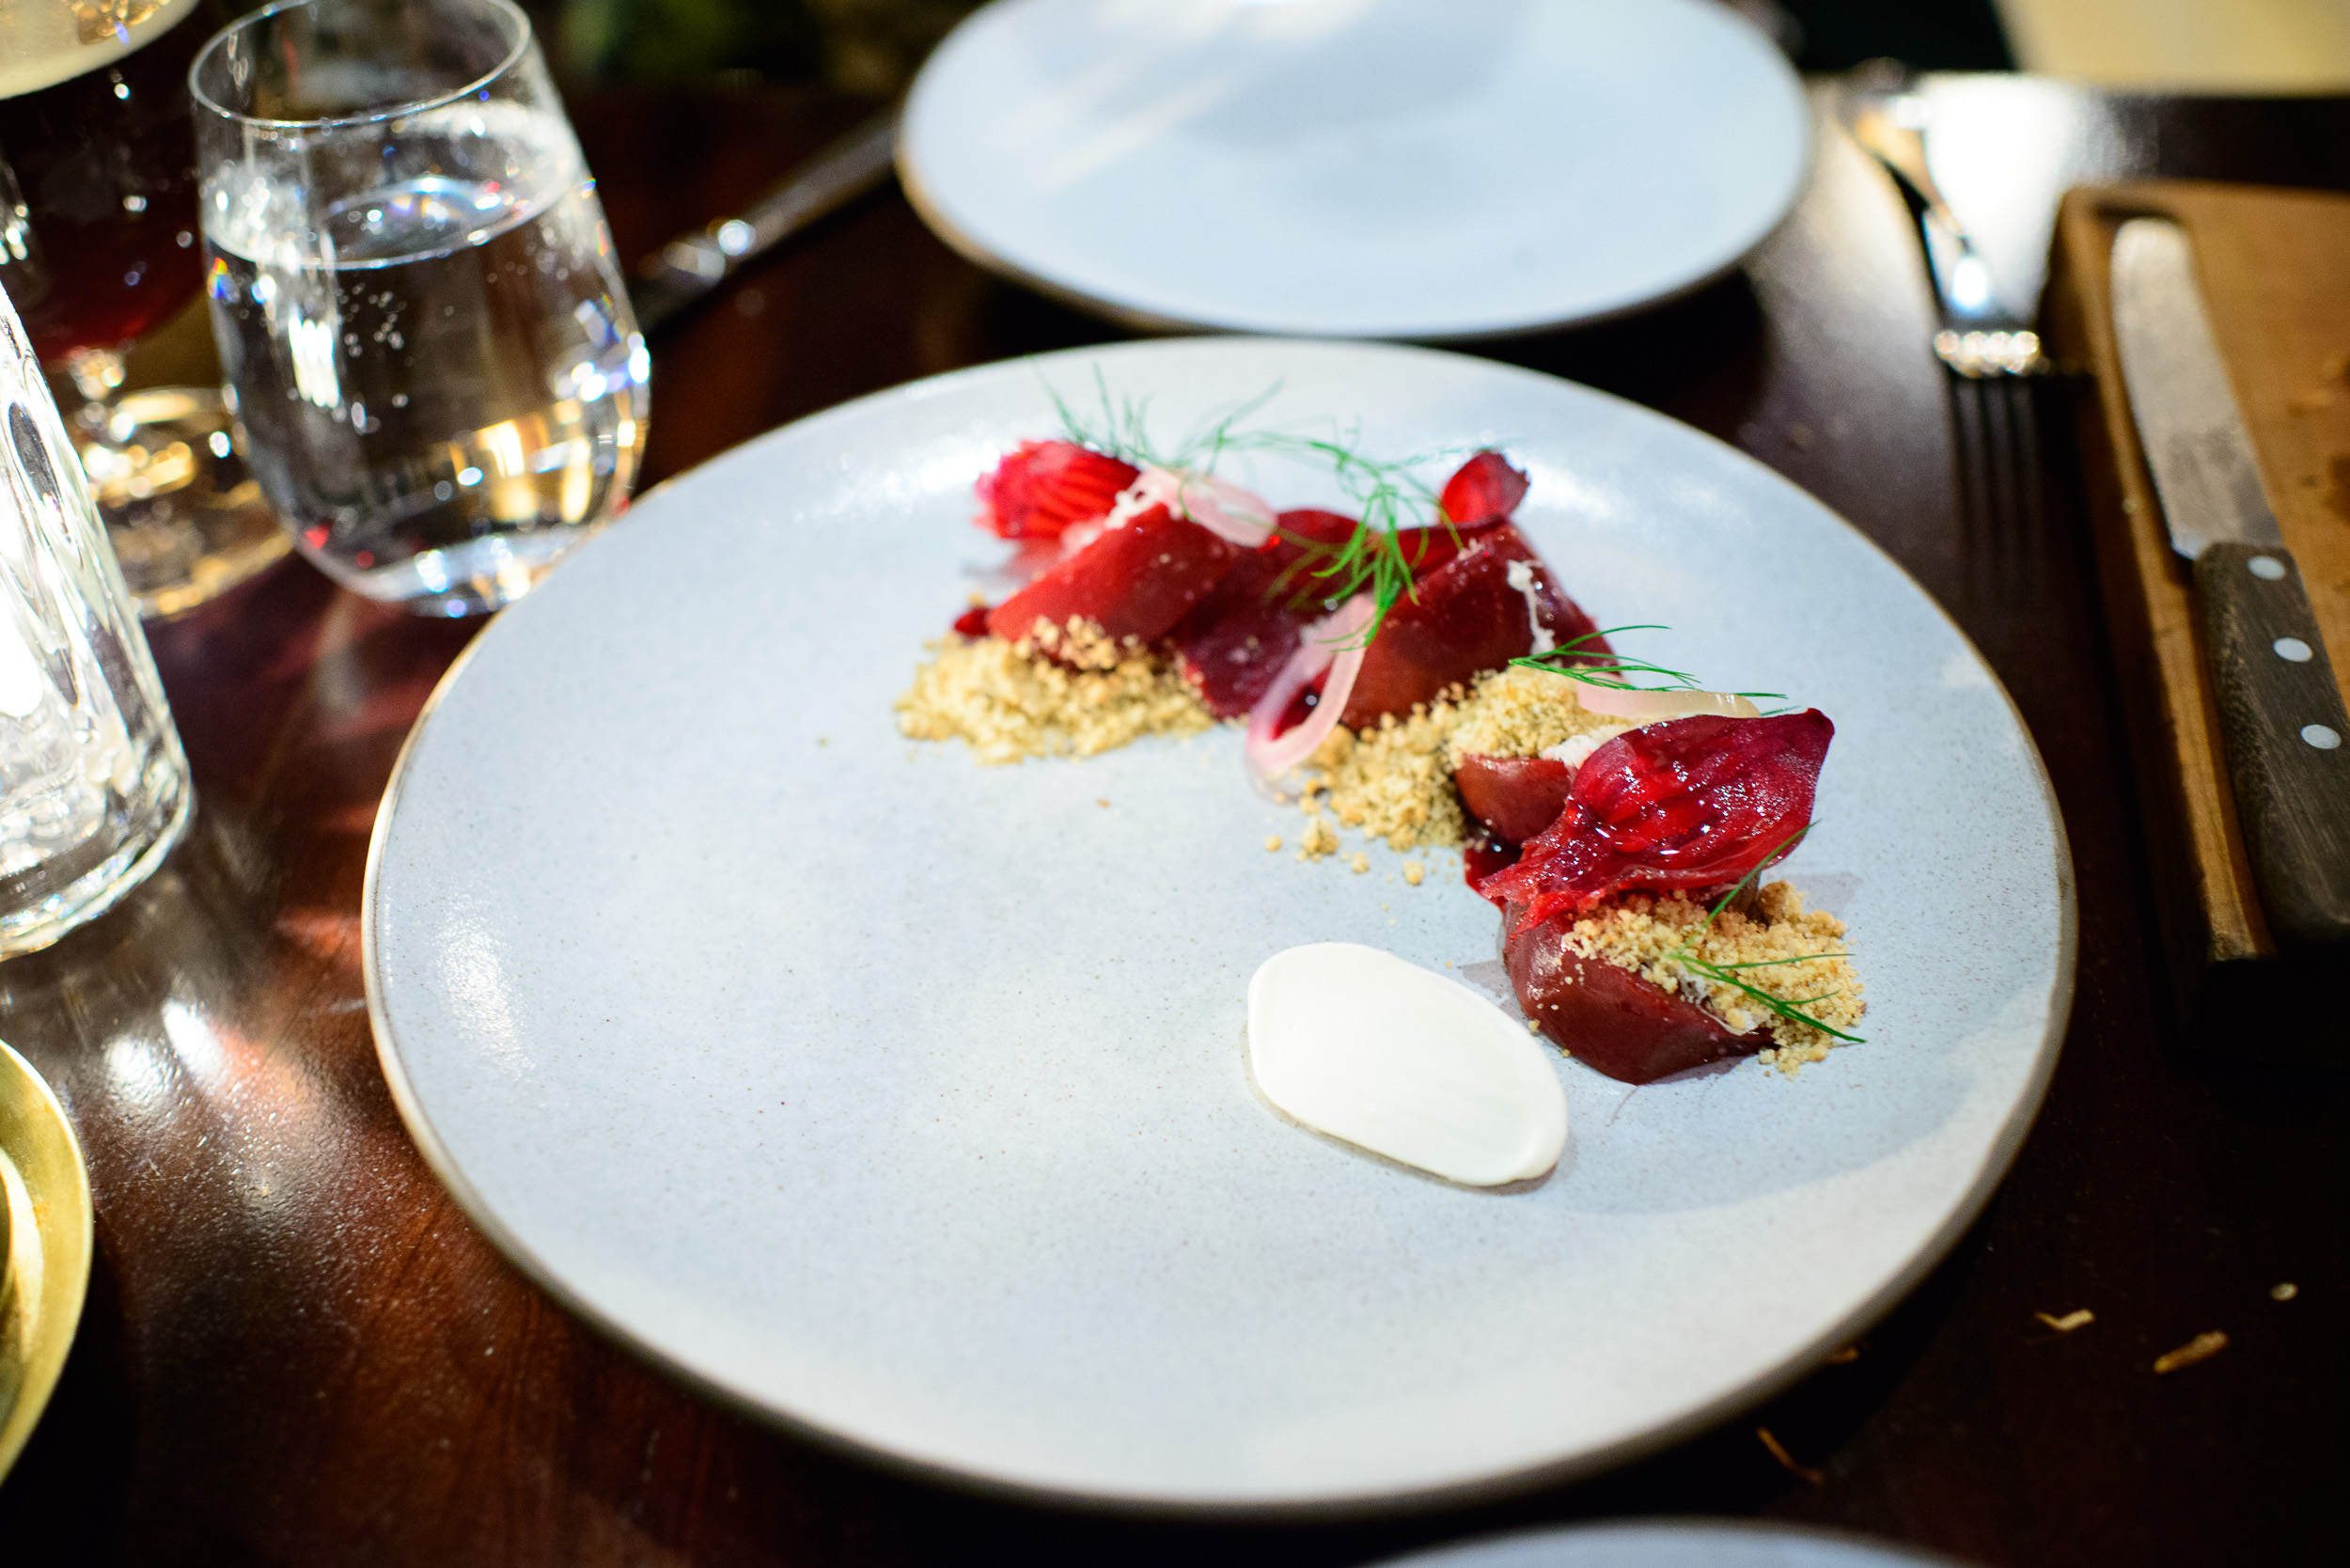 Beet: roasted with rye, agretti and smoked crème fraîche ($17)